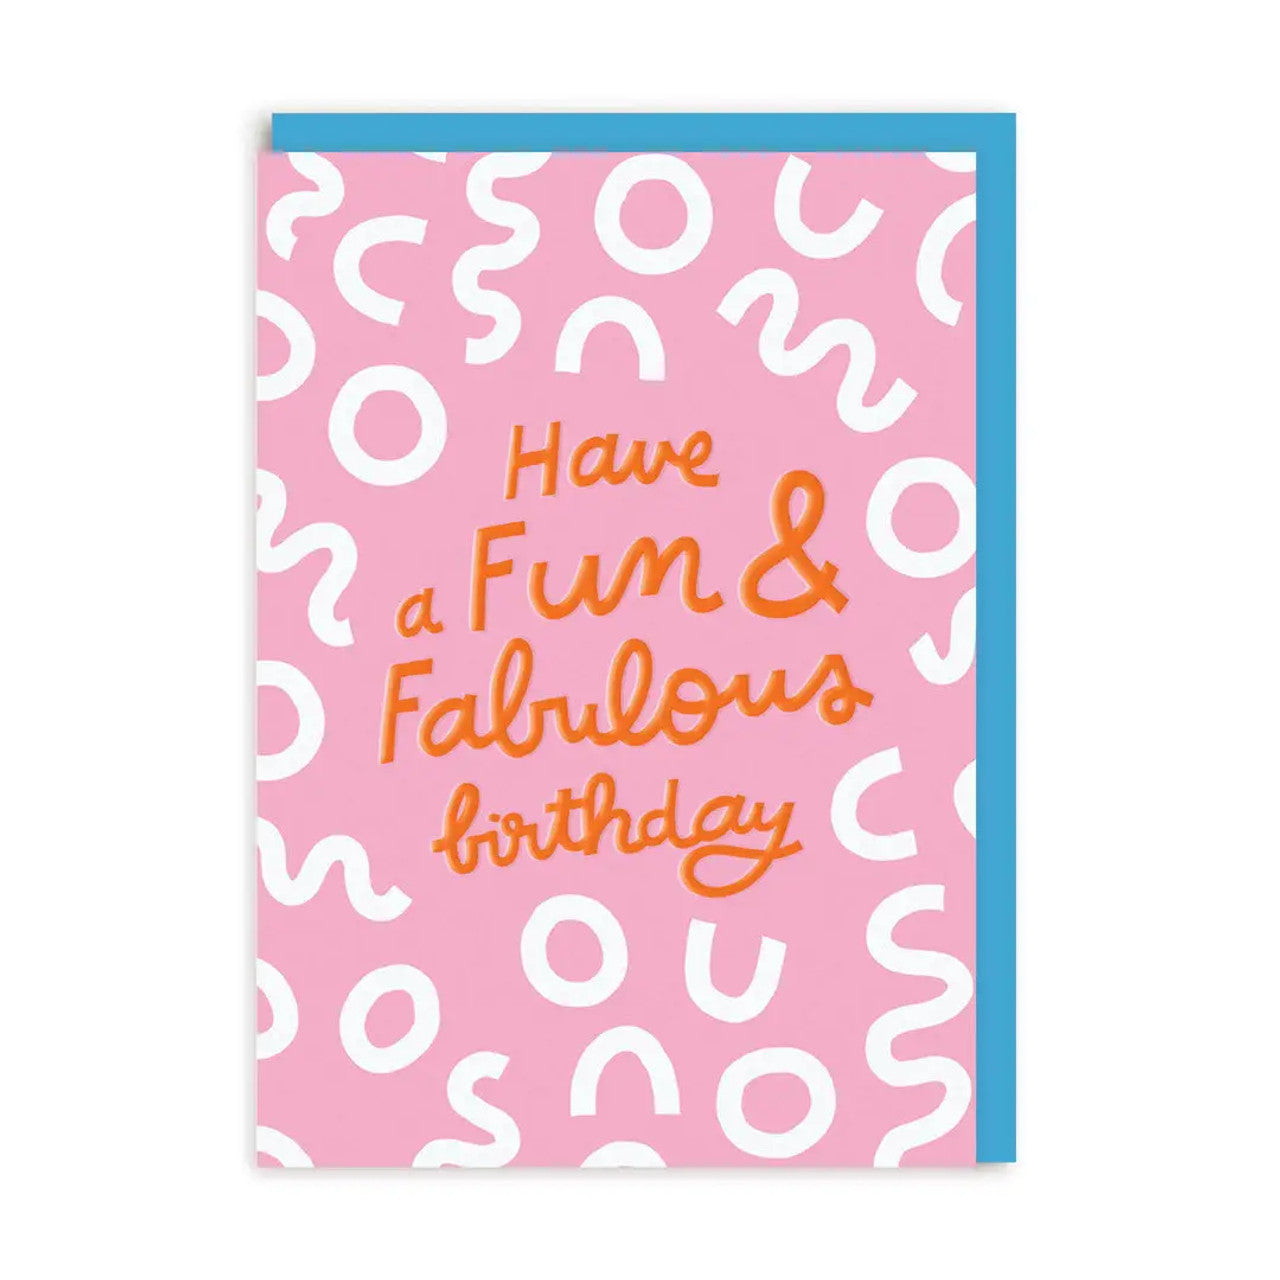 Birthday Card text reads "Have a Fun & Fabulous Birthday"